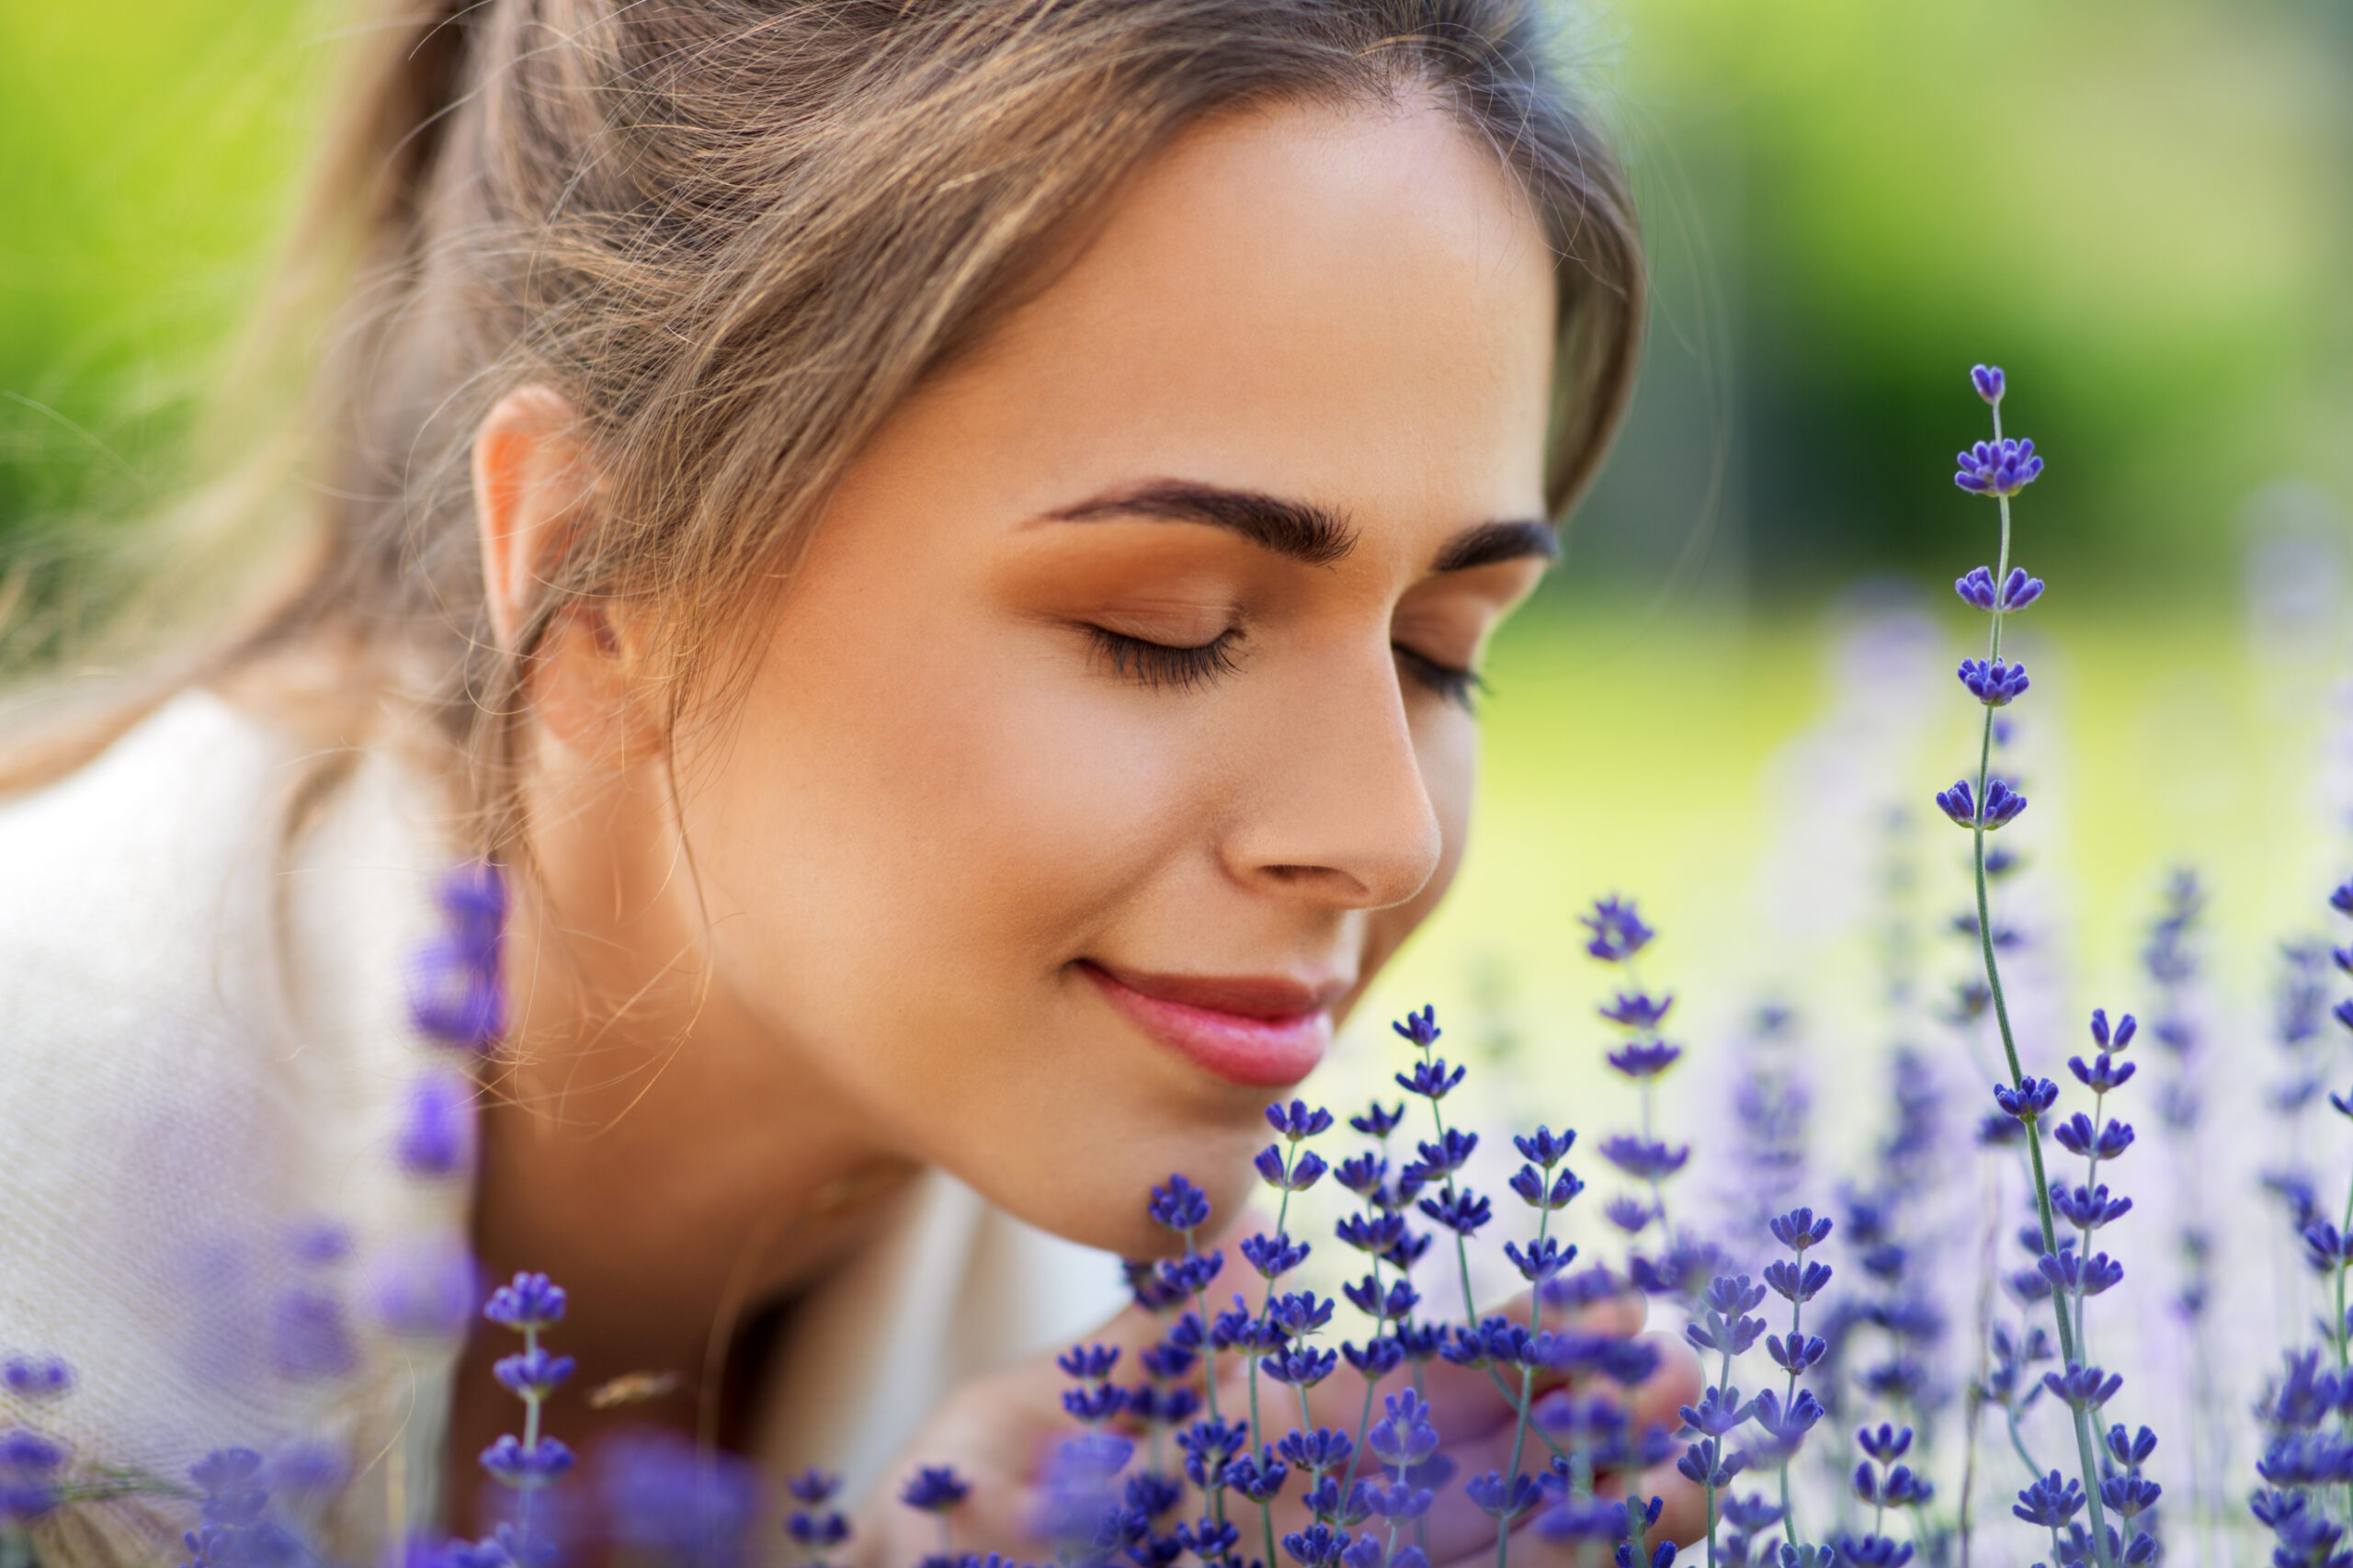 Woman Closes Eyes and Breathes in the Scent from Lavender Blooms